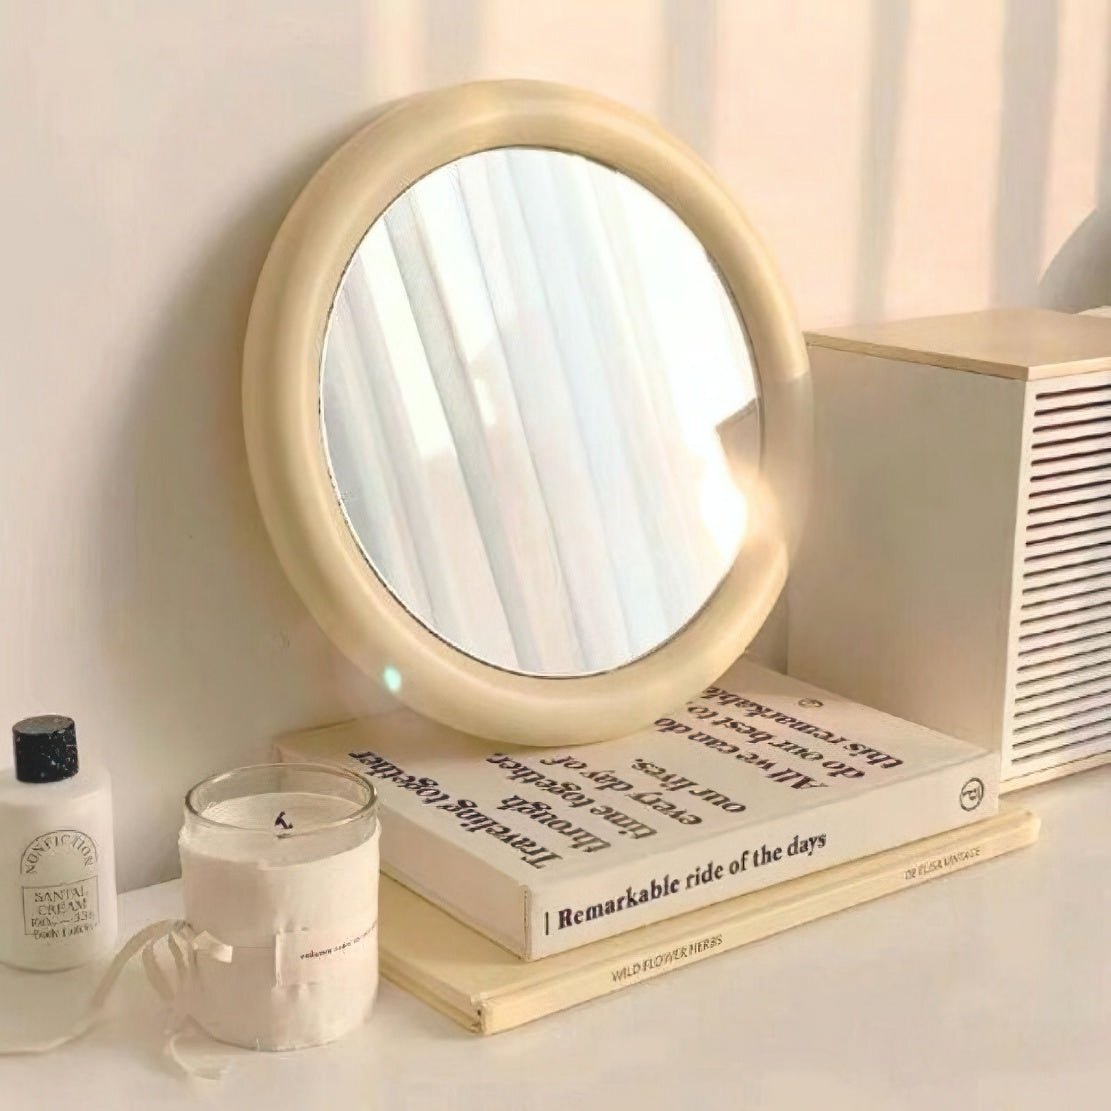 Pastel yellow round frame mirror on tabletop with books and a candle